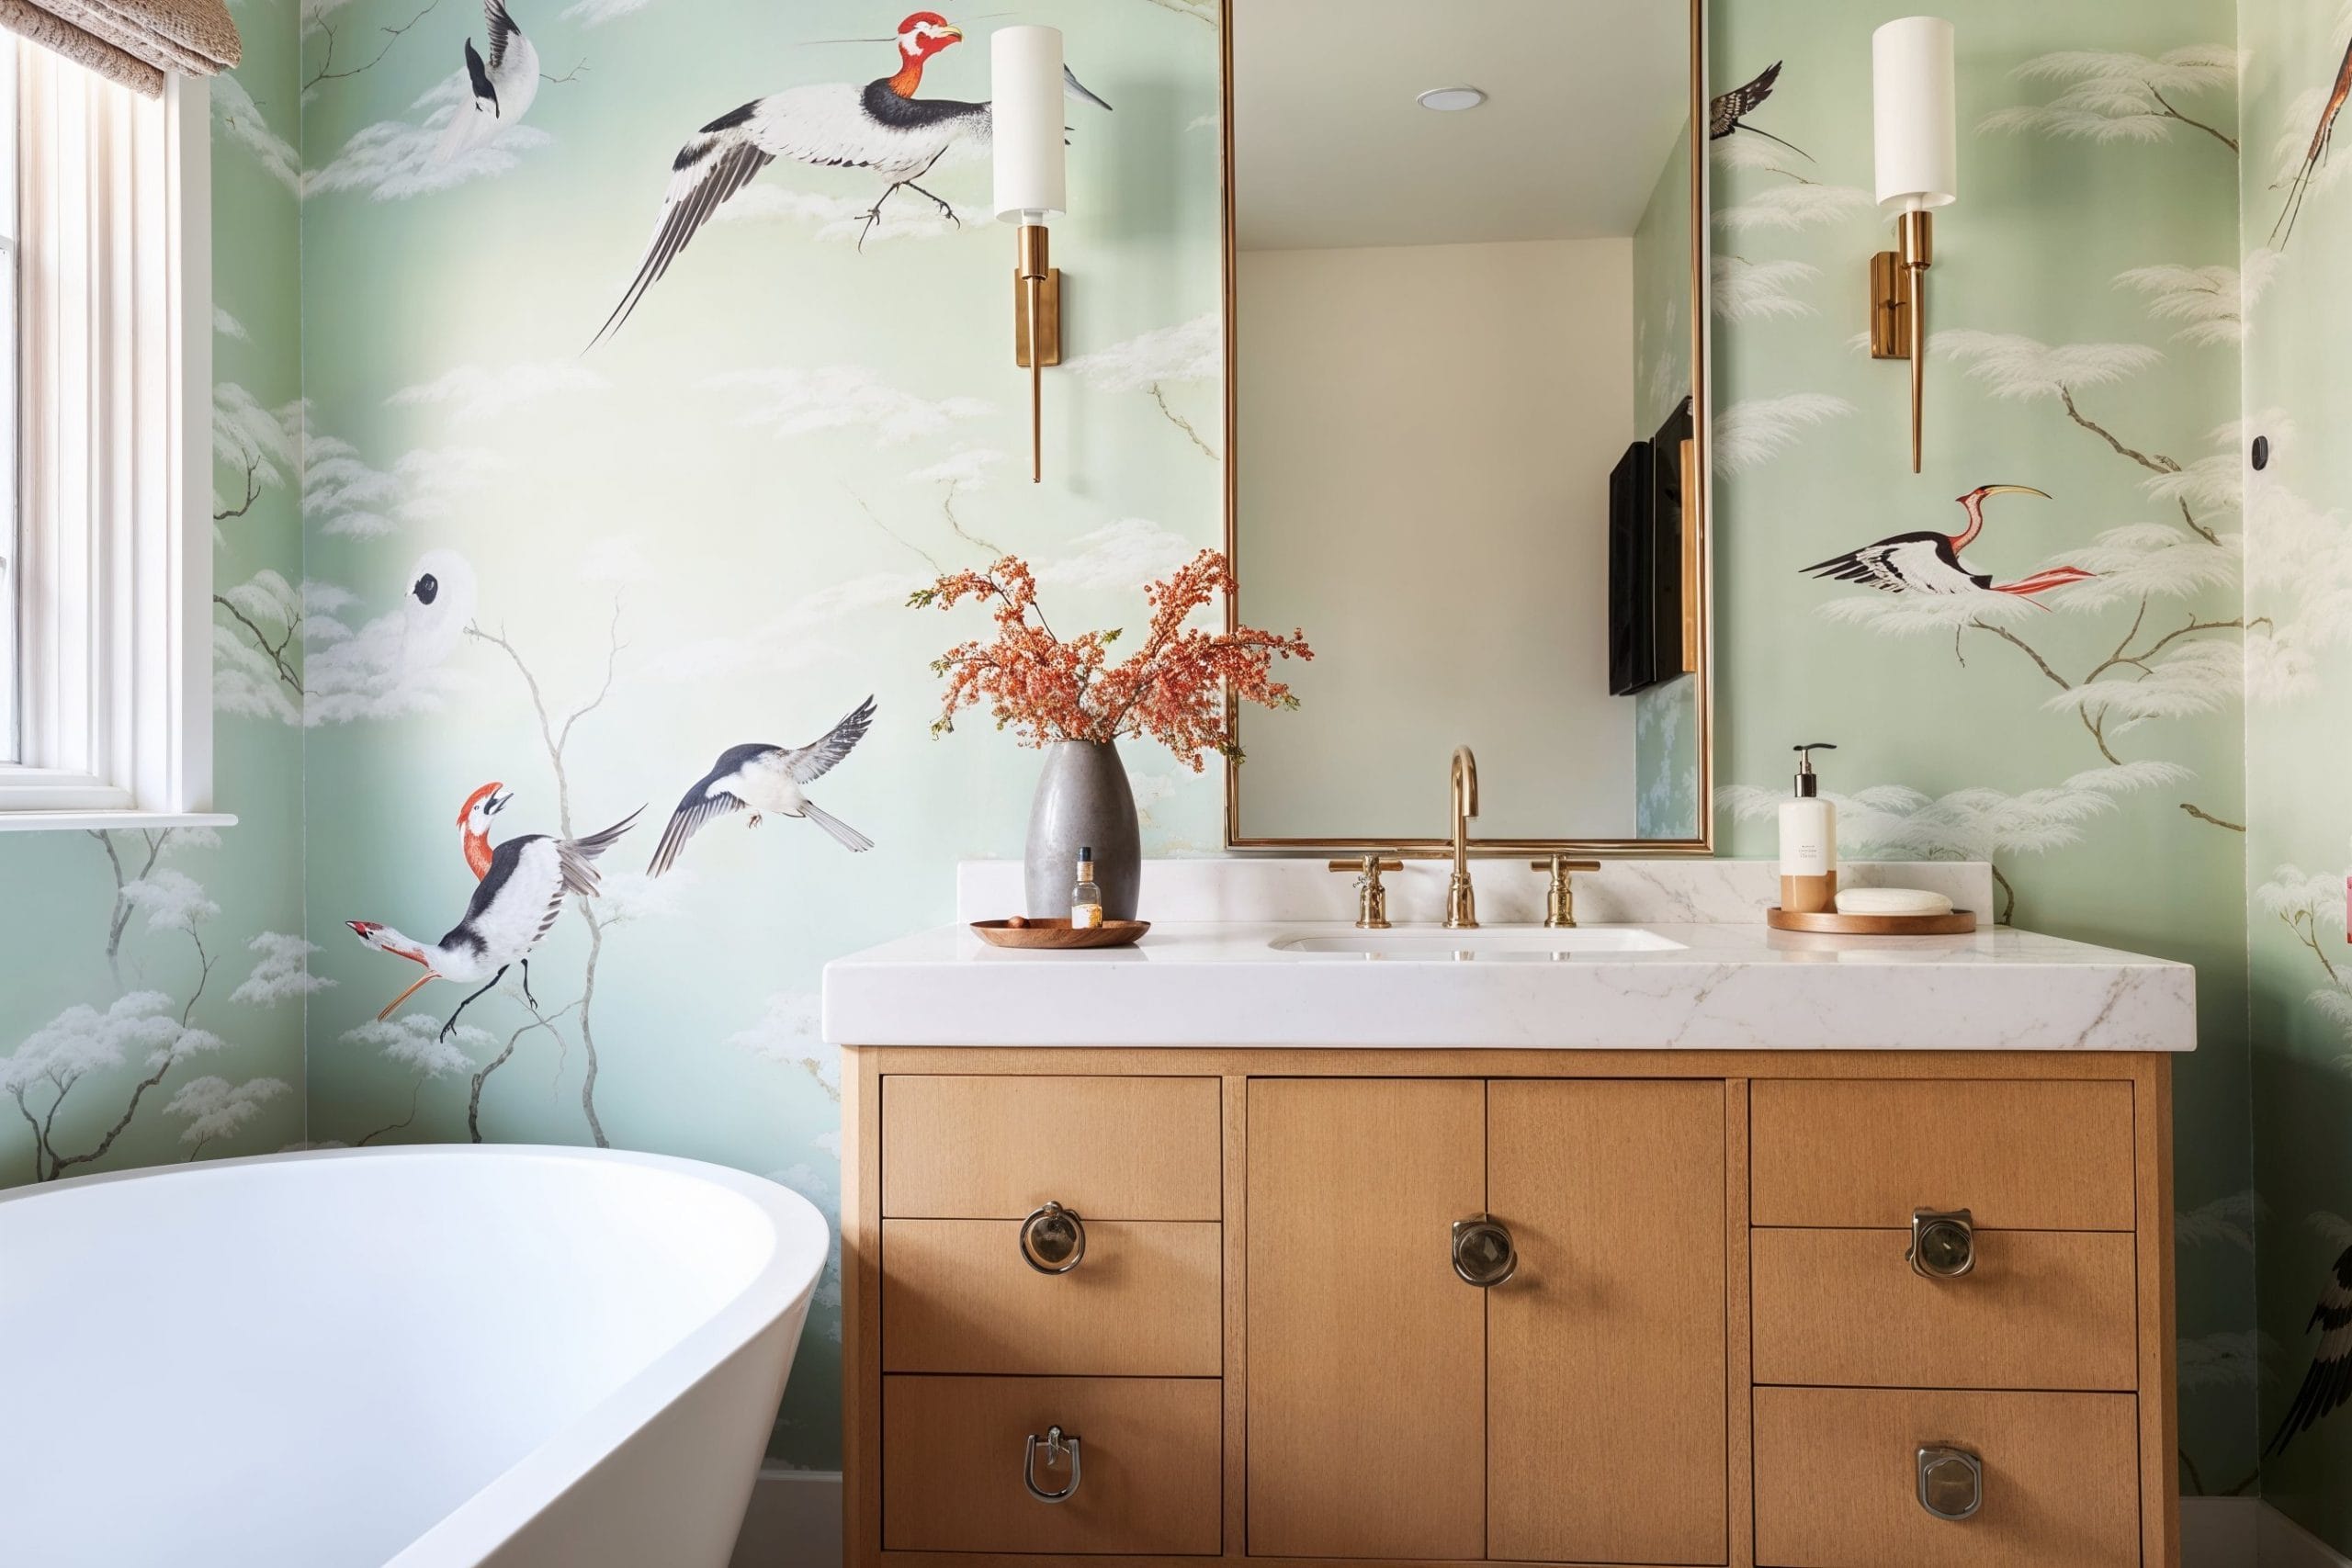 8 Best Affordable Bathroom Remodel Ideas for Style on a Budget